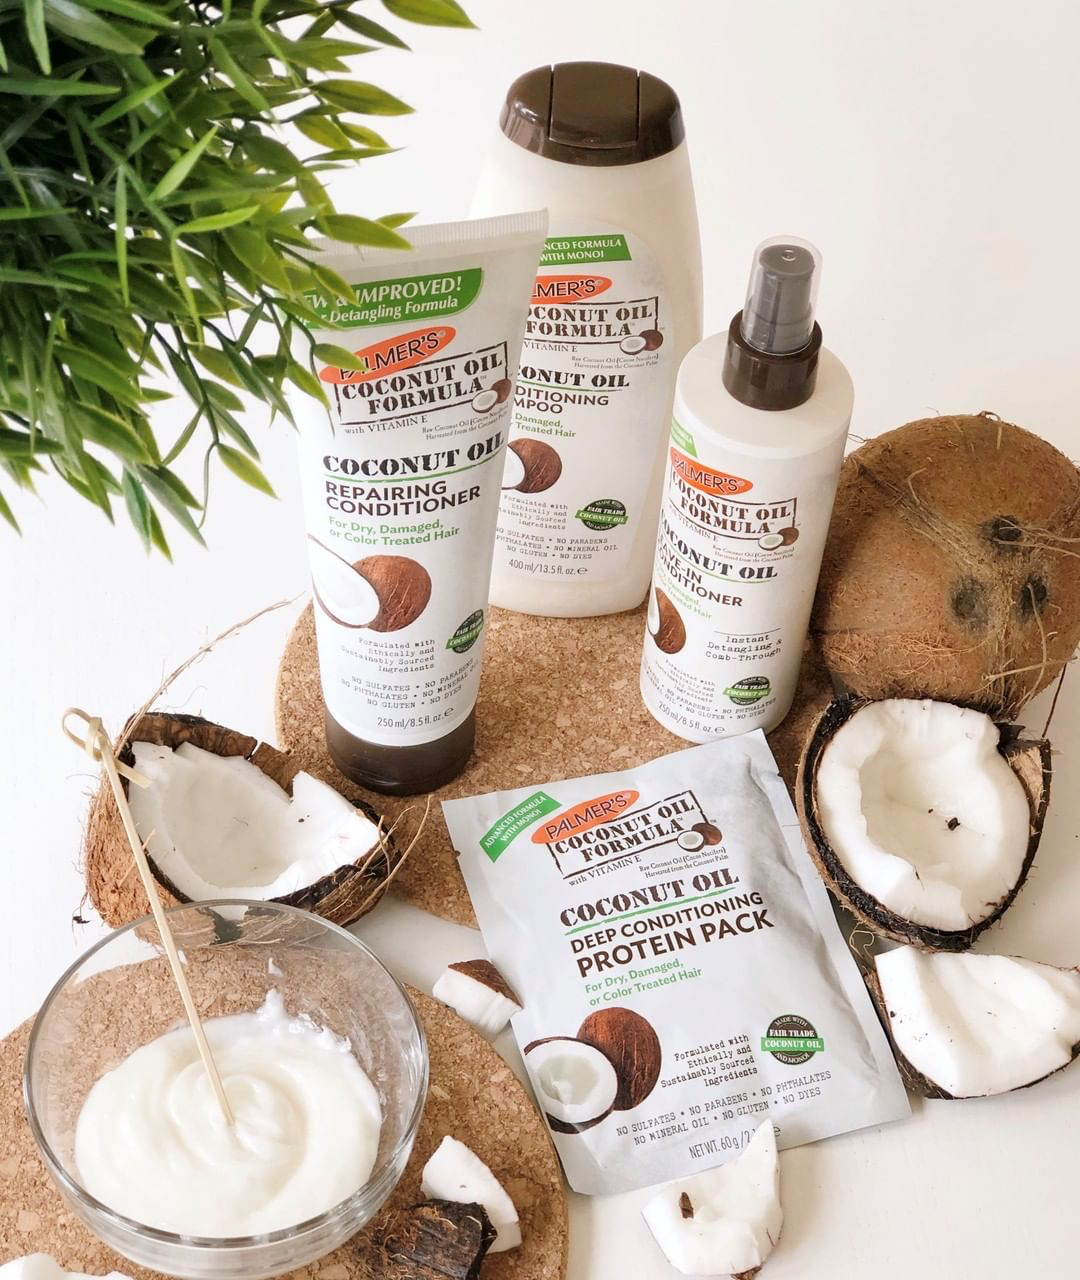 Palmer's Coconut Oil Formula Hair products for damaged hair on table with coconuts